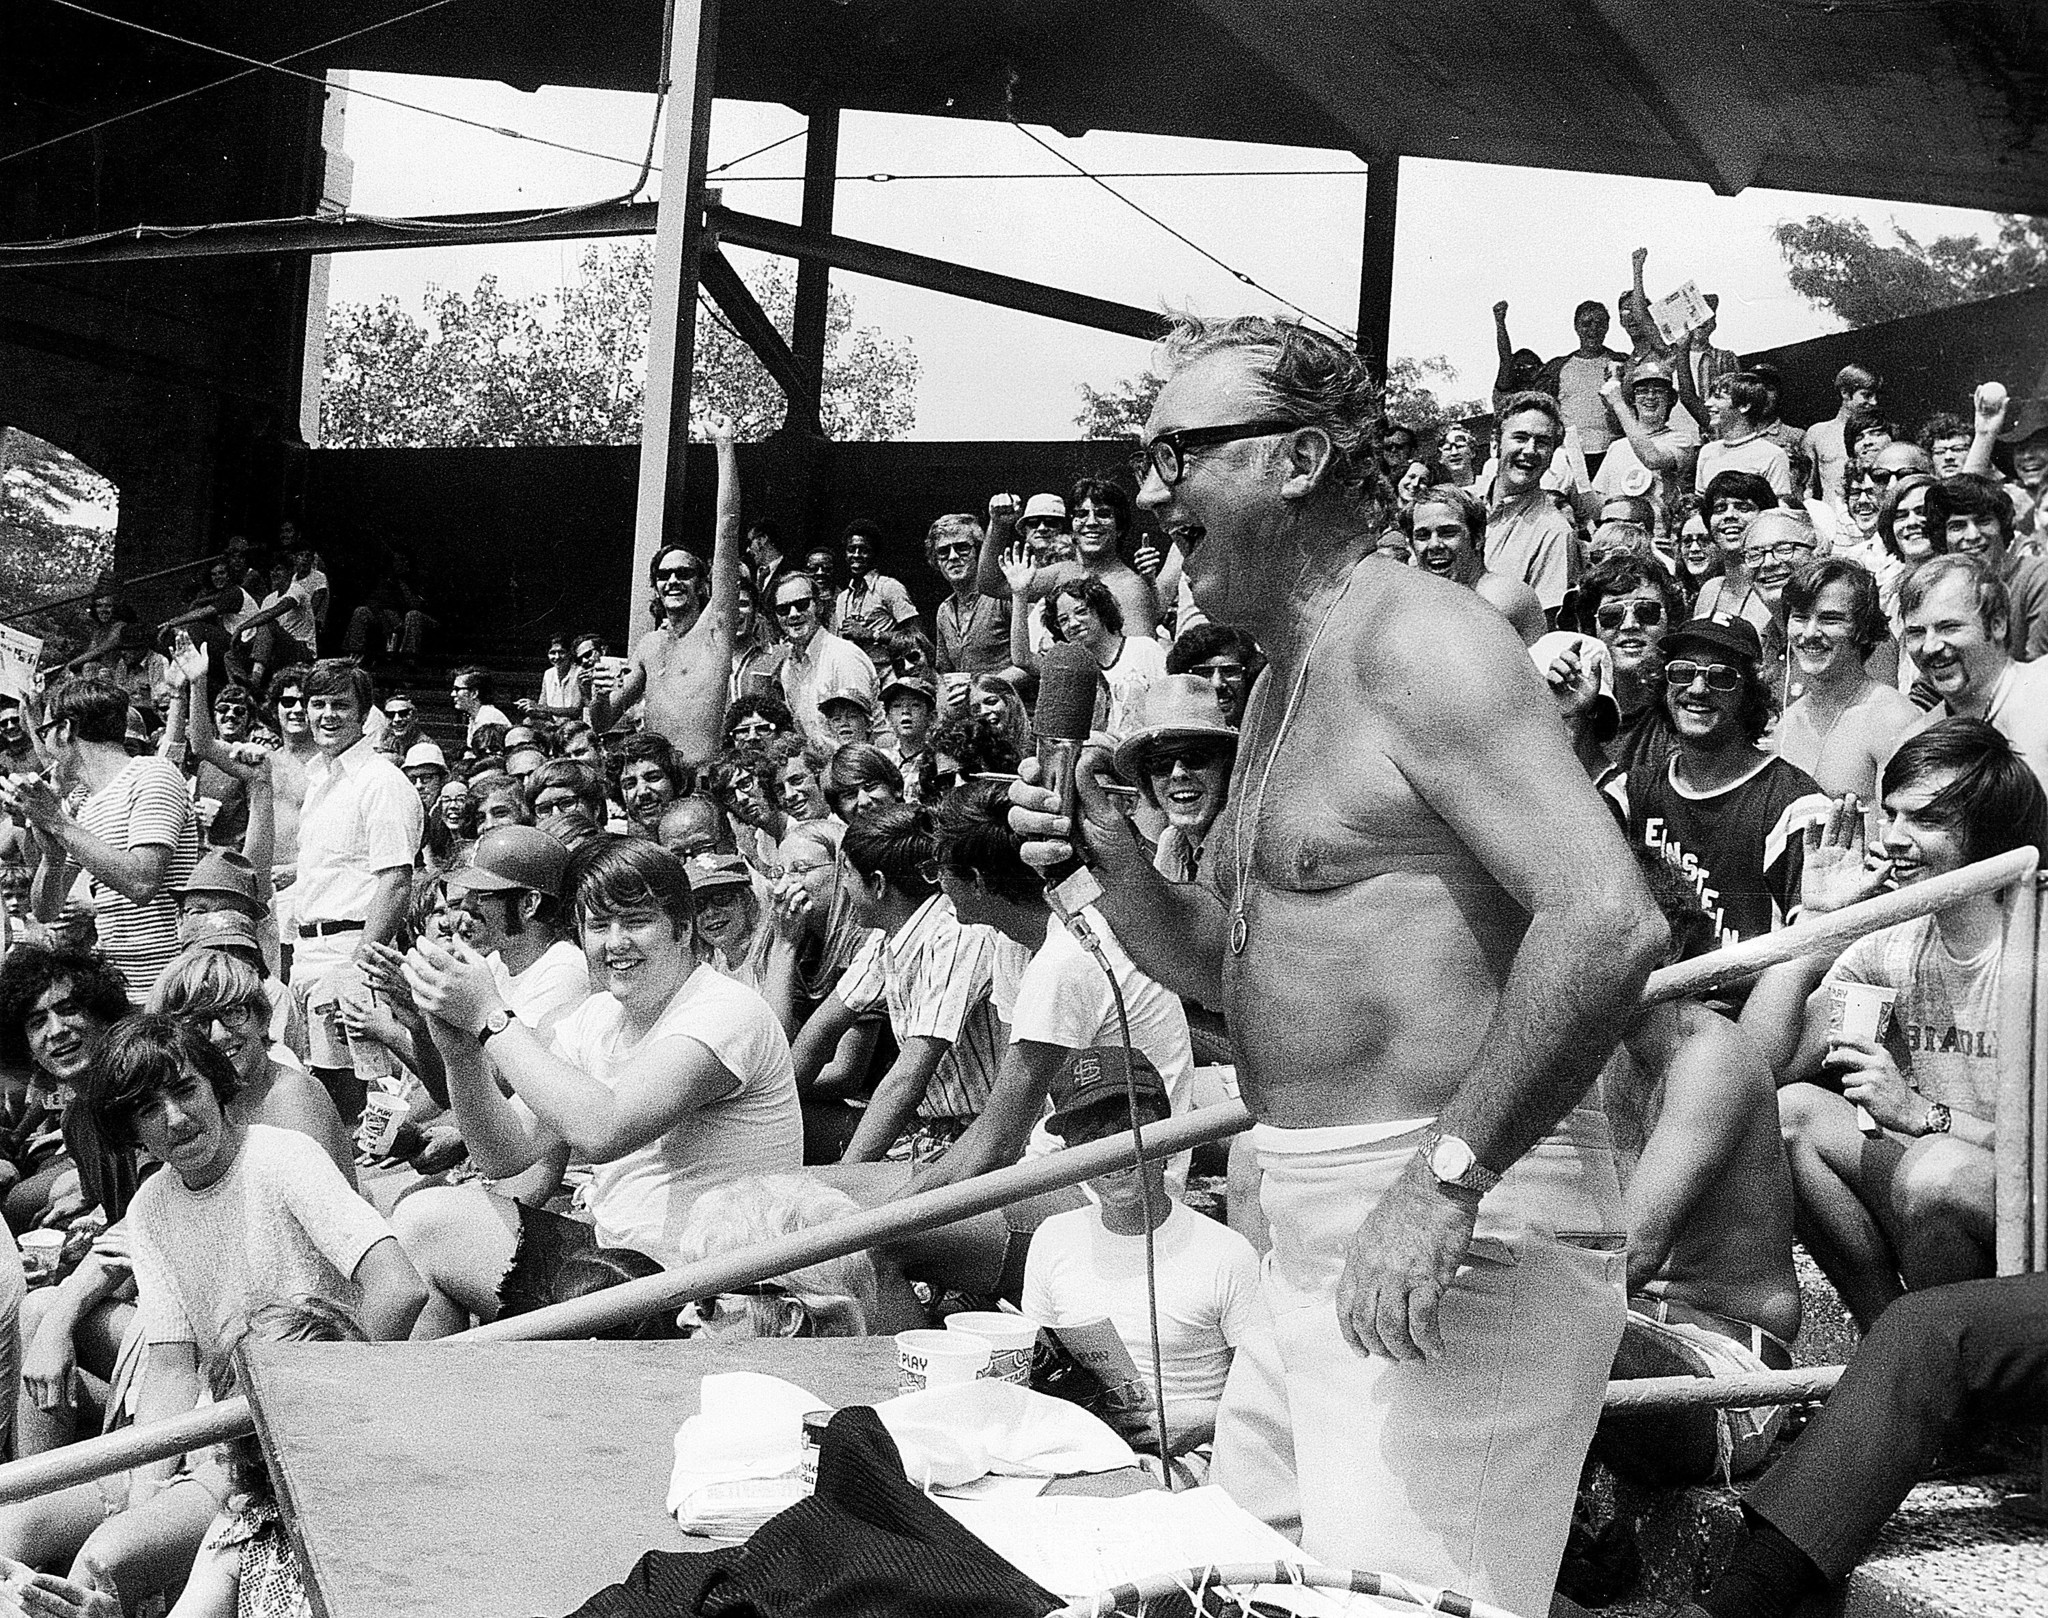 The Remarkable Life of the 'Legendary Harry Caray', Chicago News